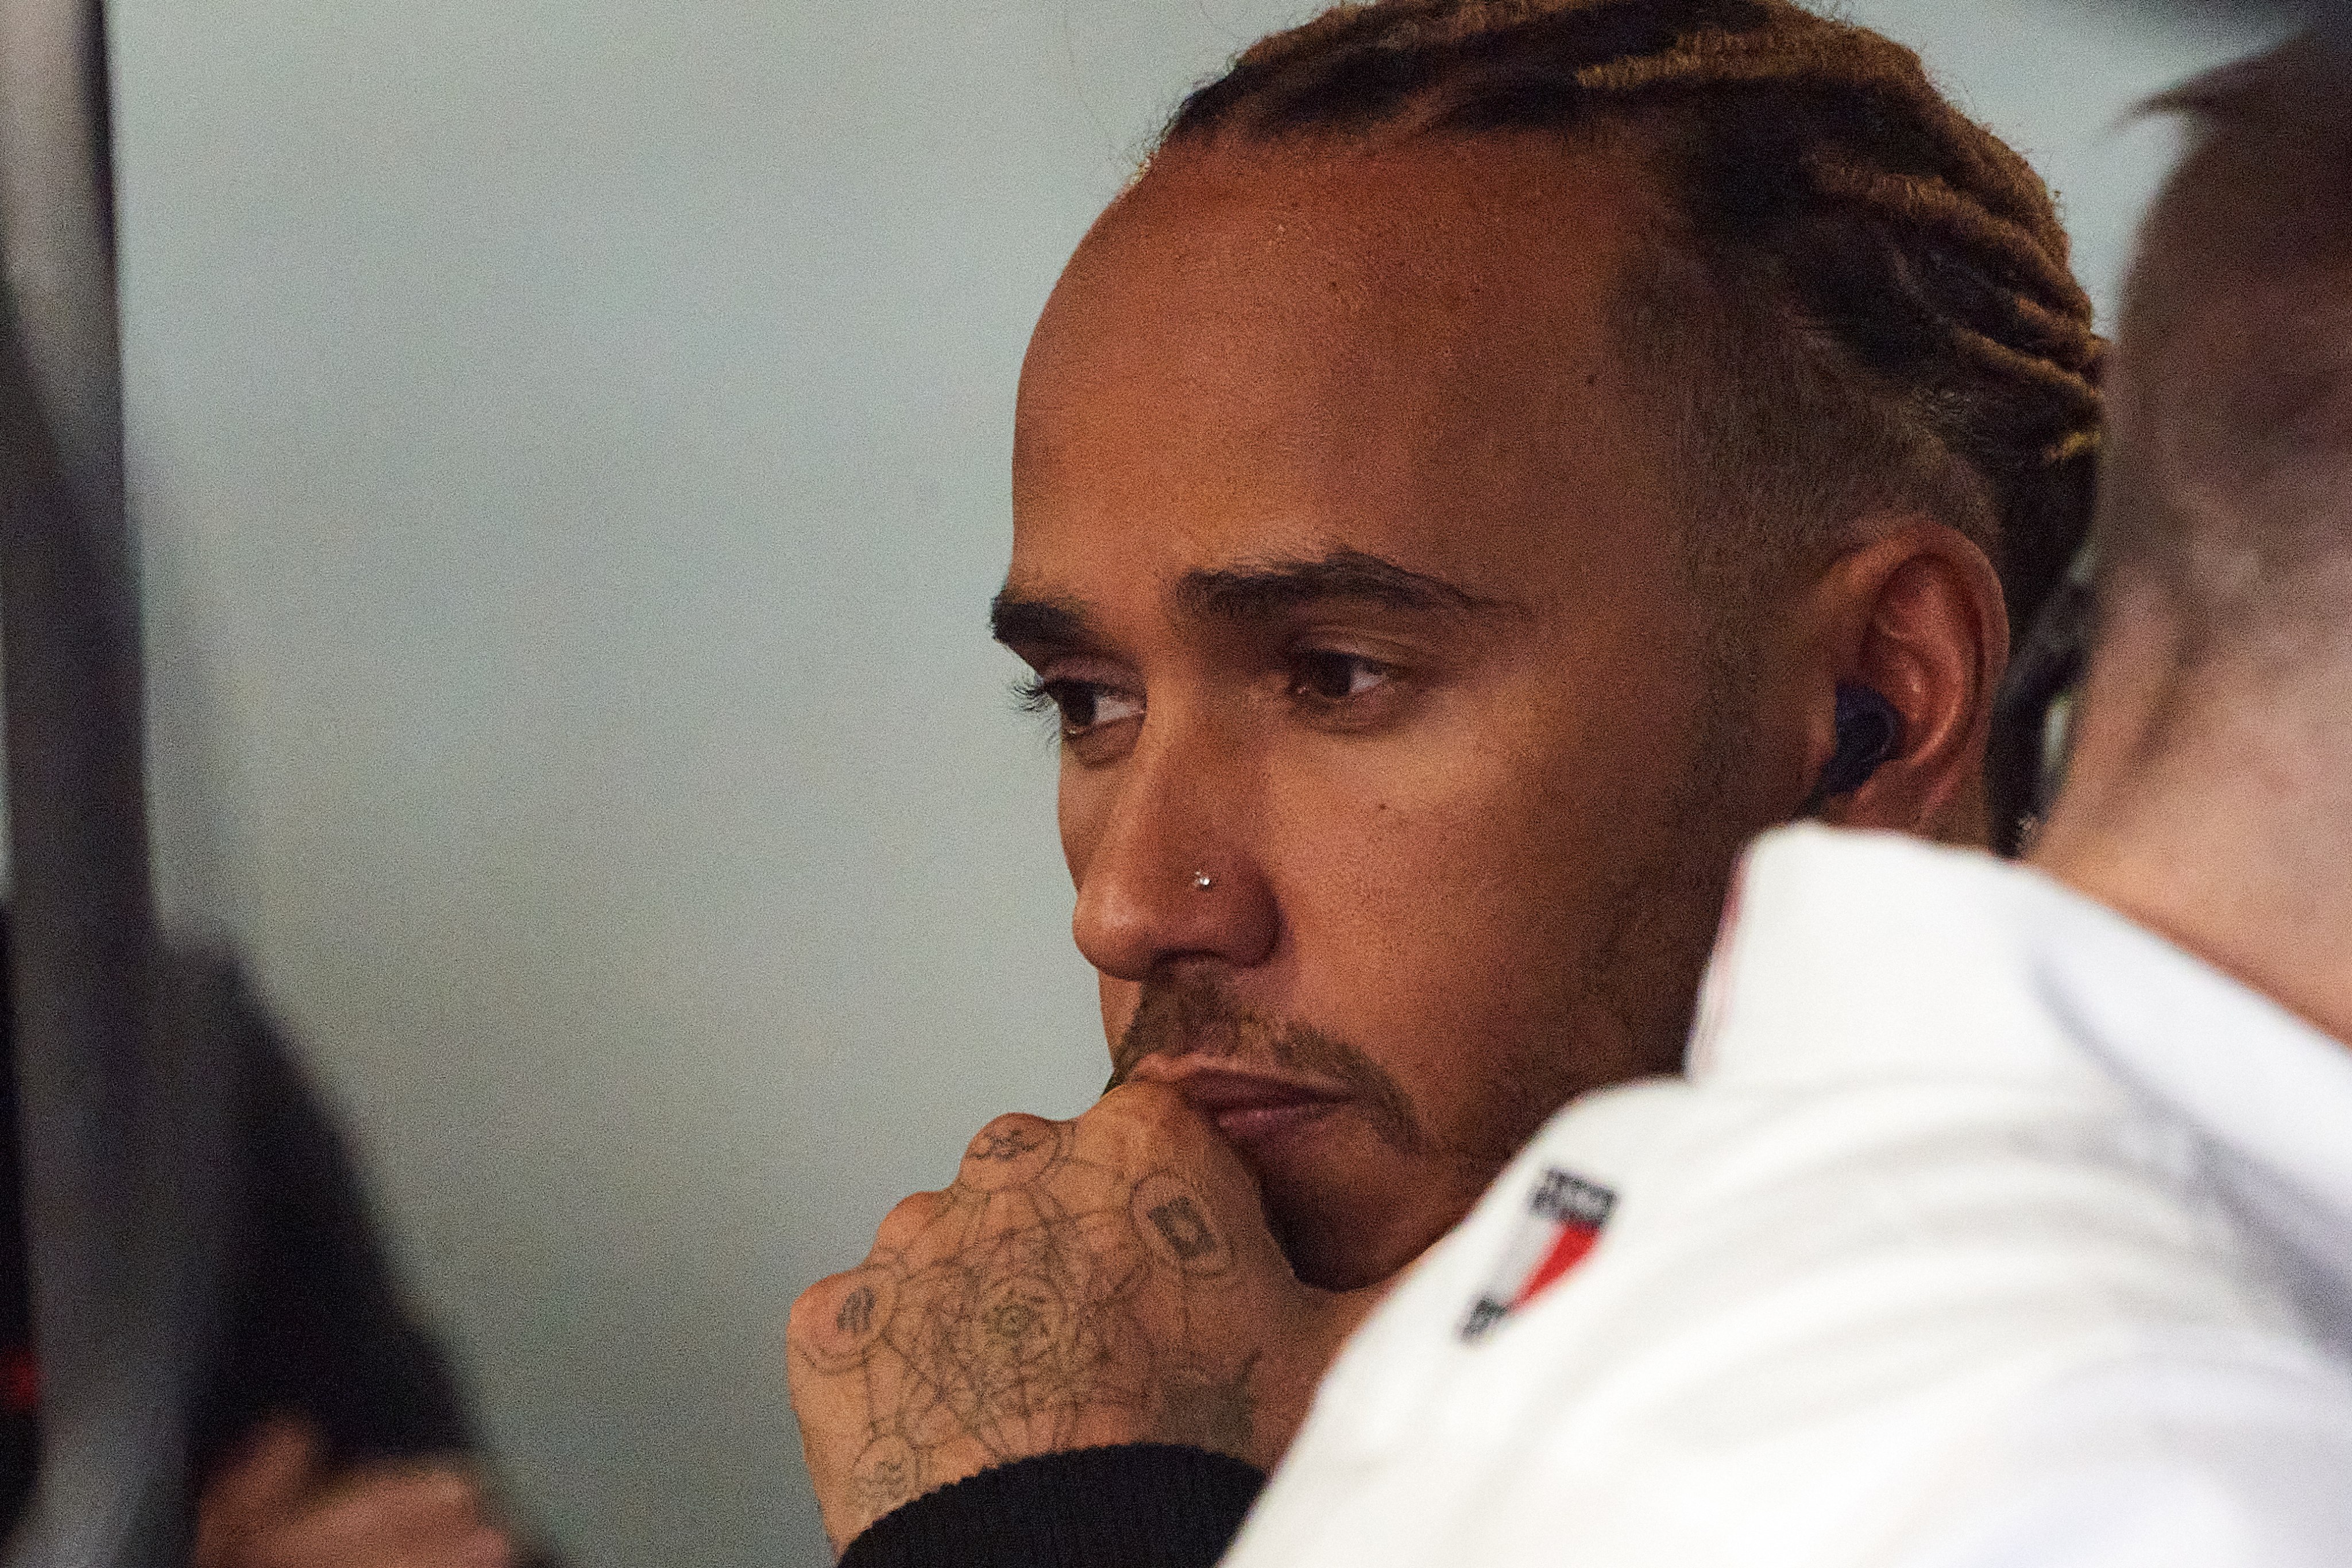 Lewis Hamilton of Mercedes cuts a frustrated figure after practice at the Canadian Grand Prix. Photo: EPA-EFE